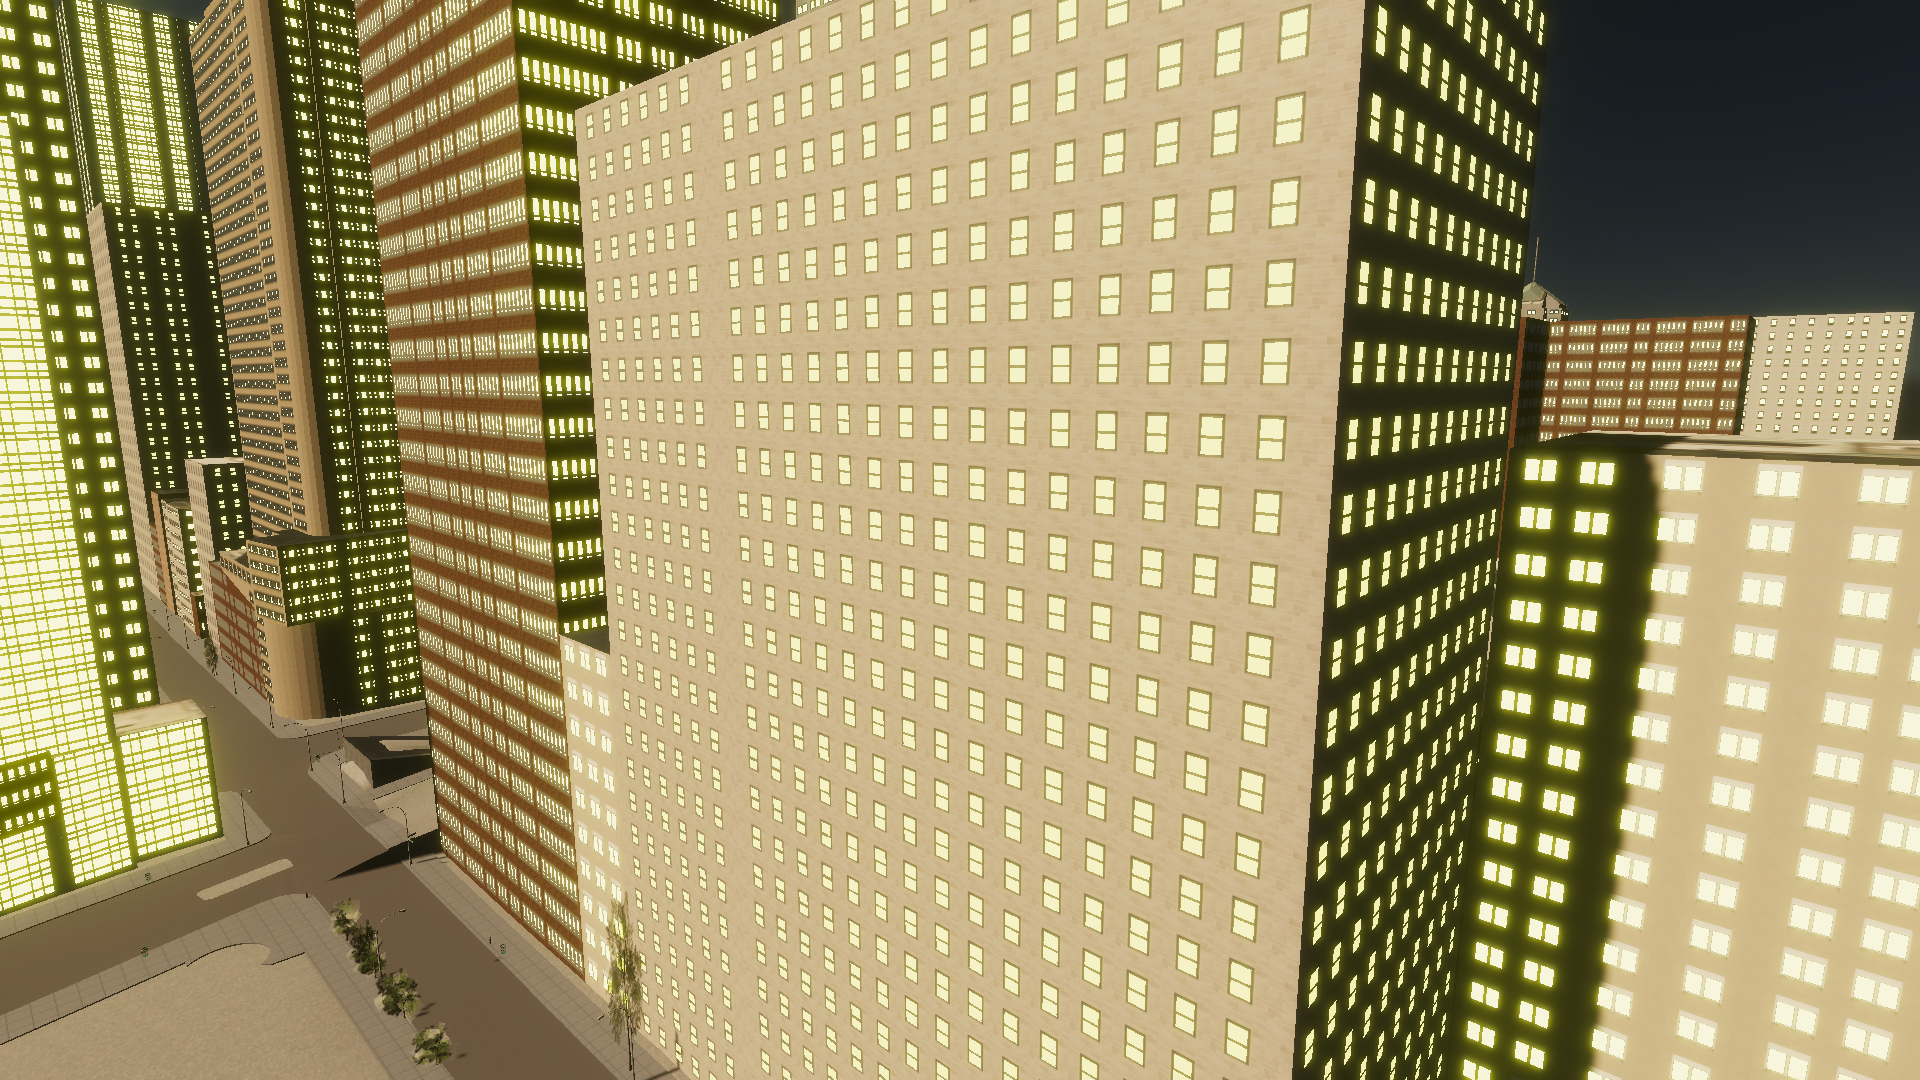 The result of adding the step node. Now only the parts of the building with windows are glowing.